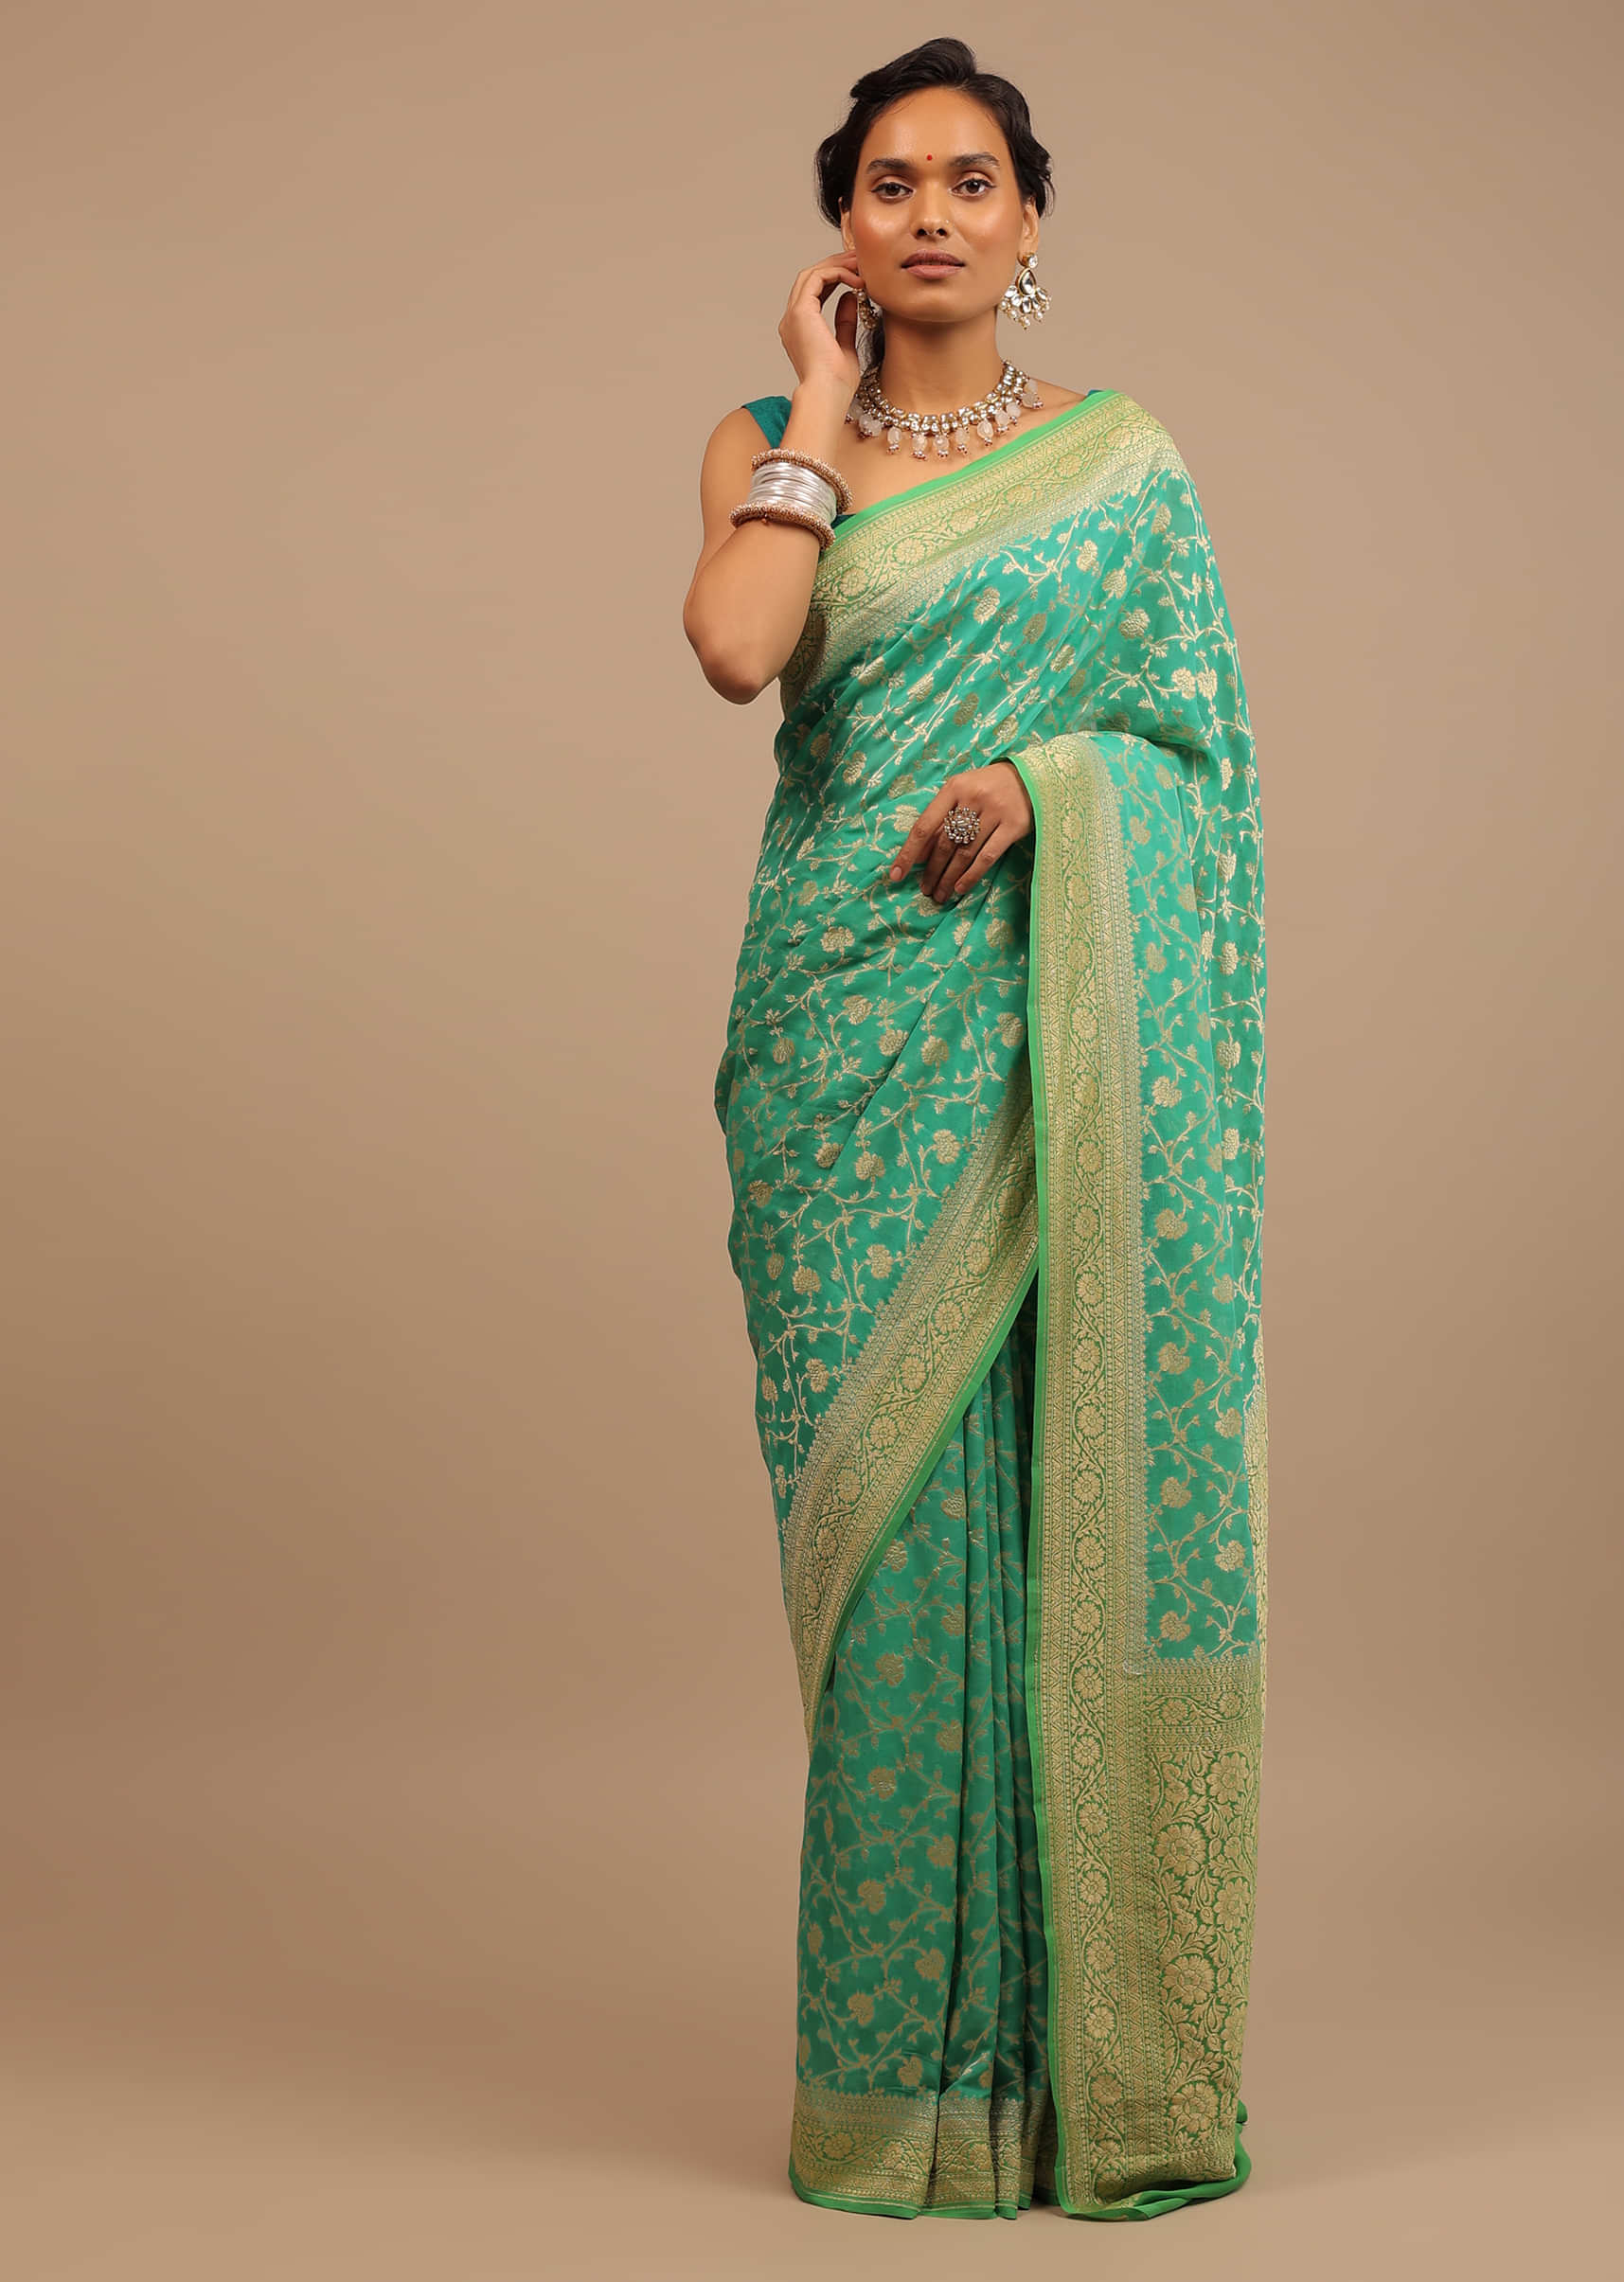 Peacock Blue Cotton Silk Saree with Green Blouse Piece  Droonicom